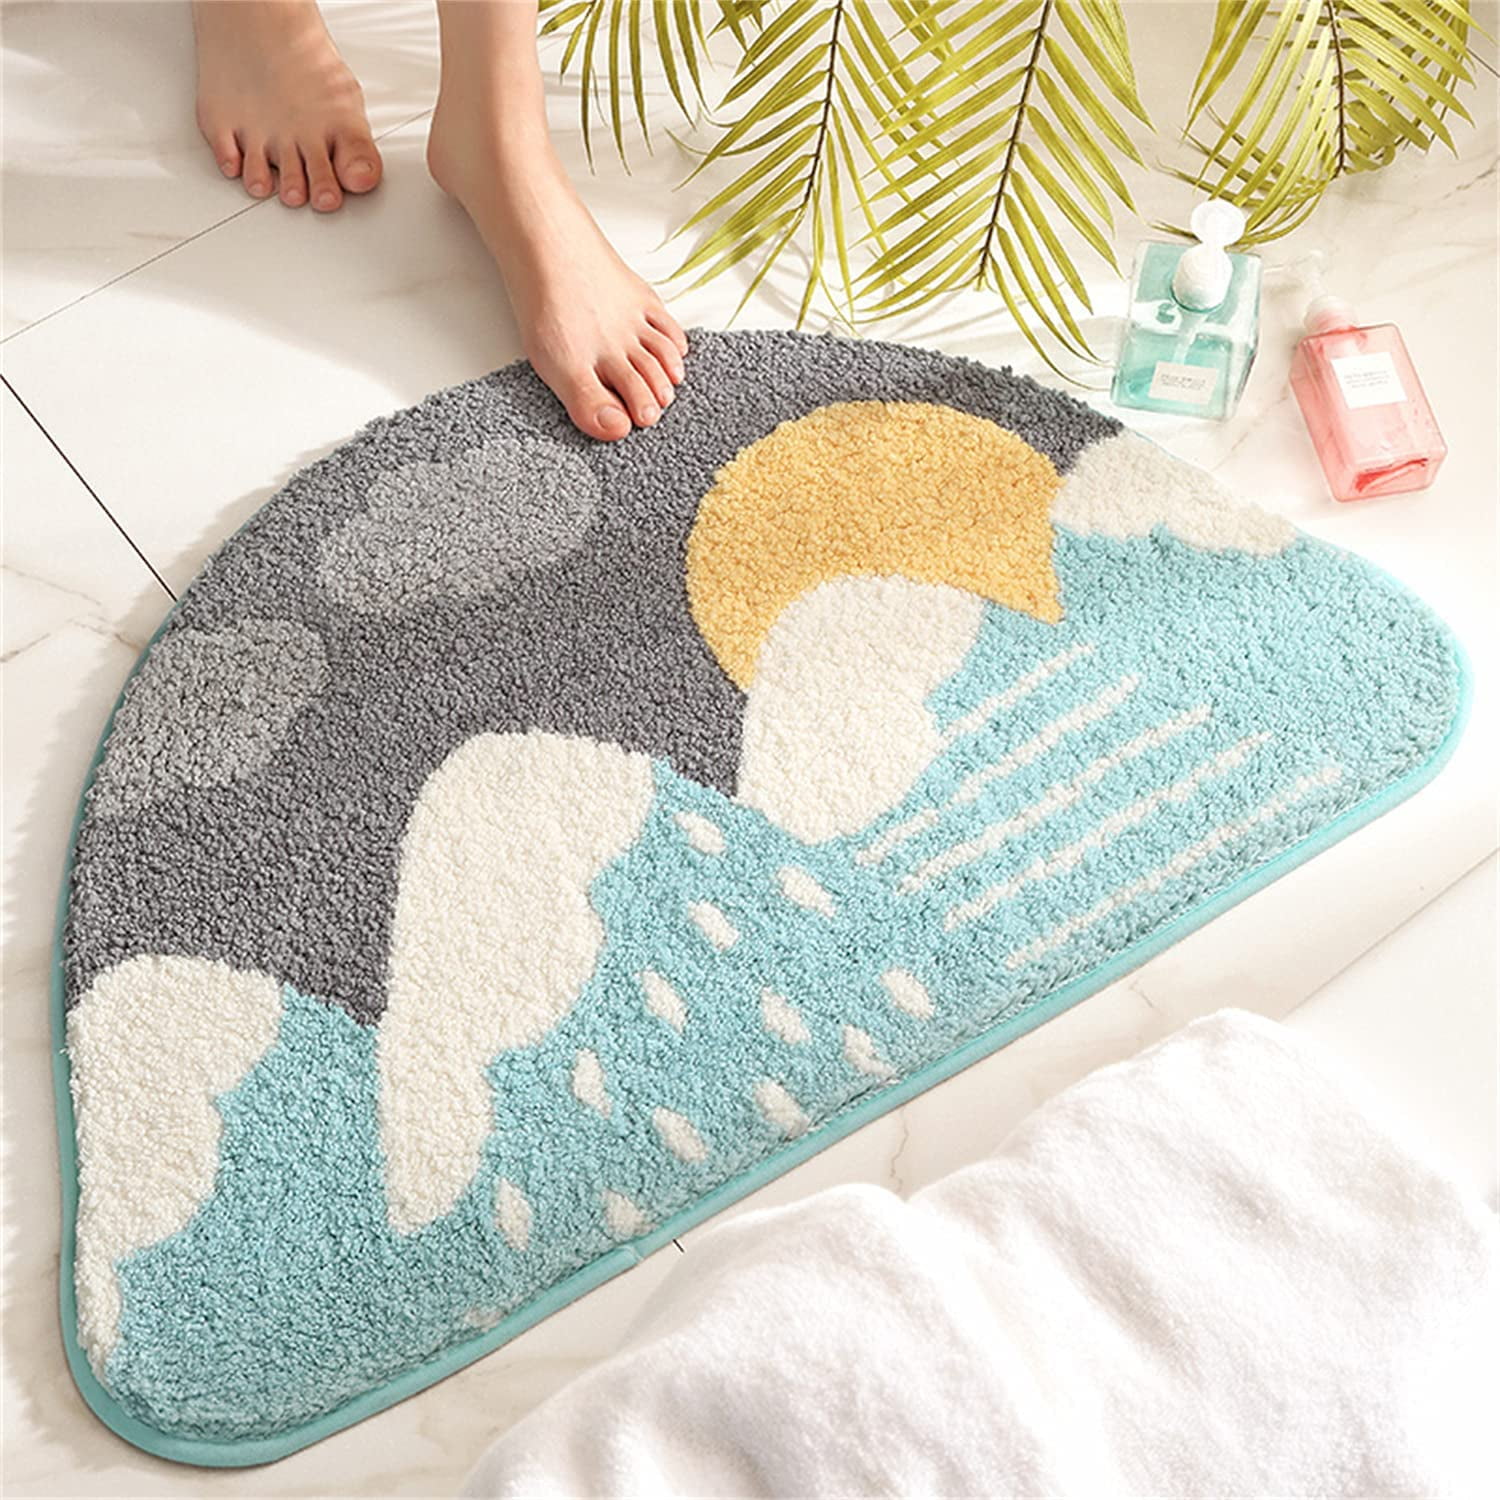 Details about   Cotton Bath Rug Set of 2 Soft Absorbent Bathroom Mats Rugs w/ Anti-Slip Backing 